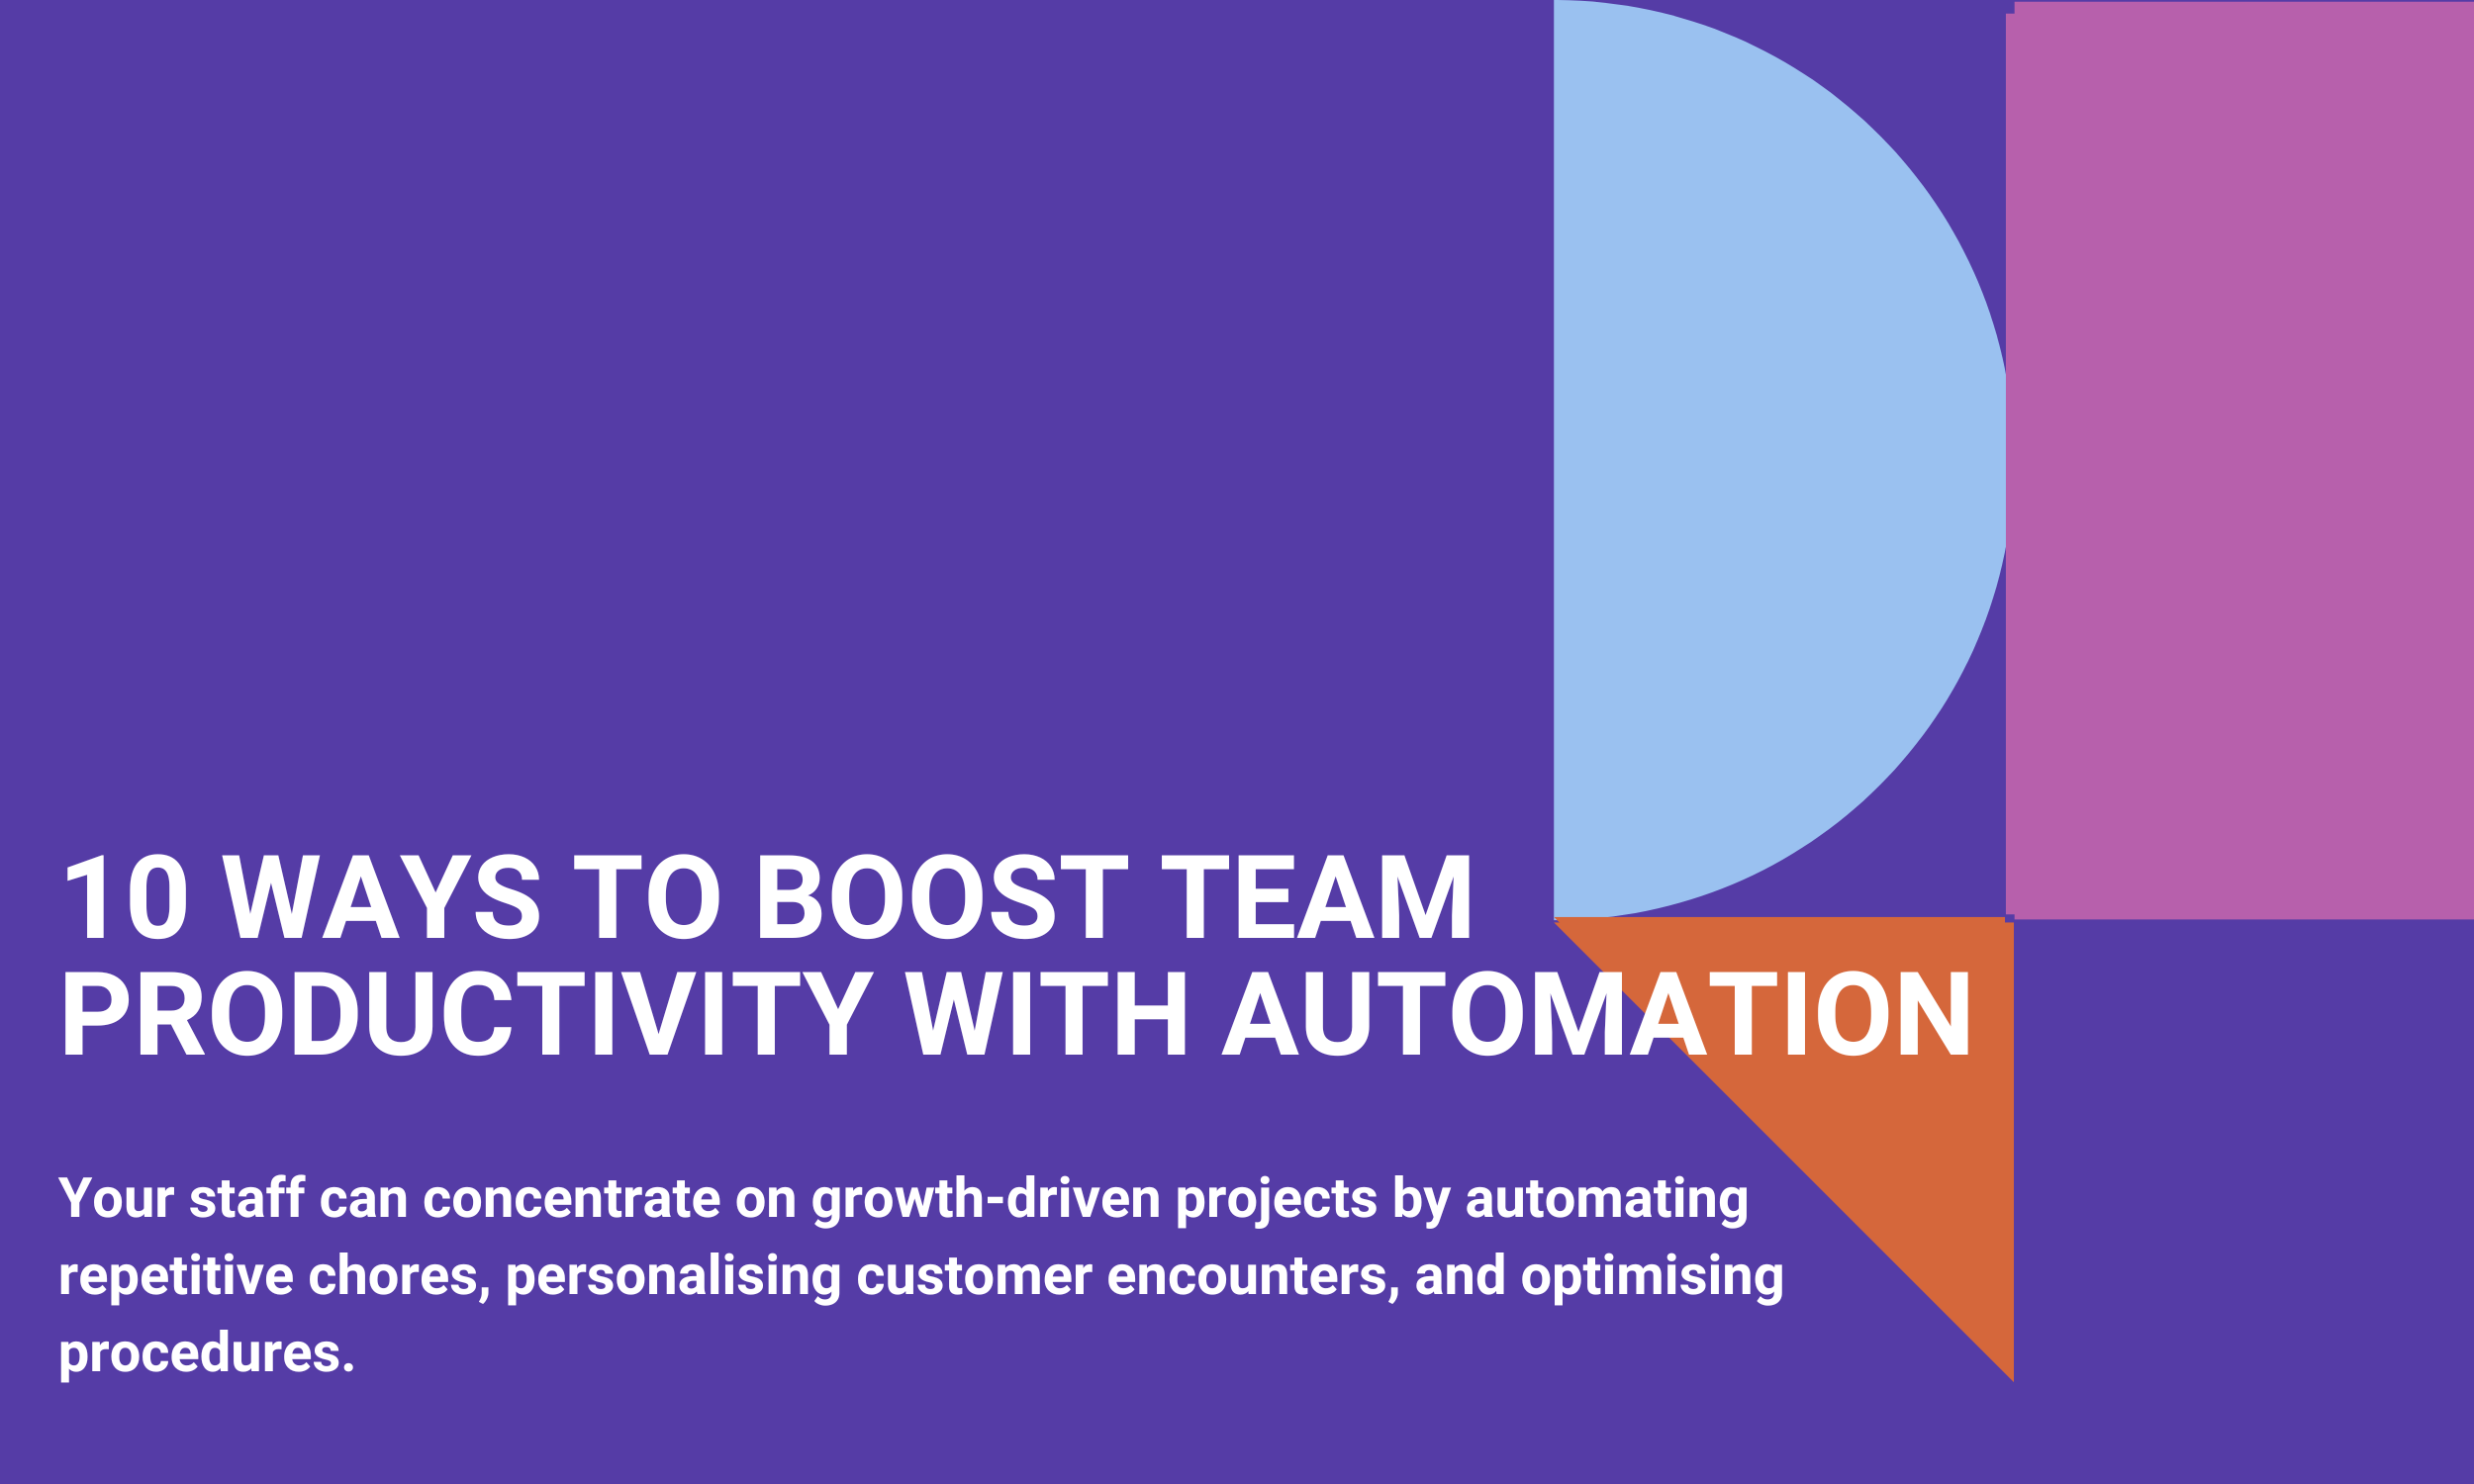 10 Ways to Boost Team Productivity with Automation